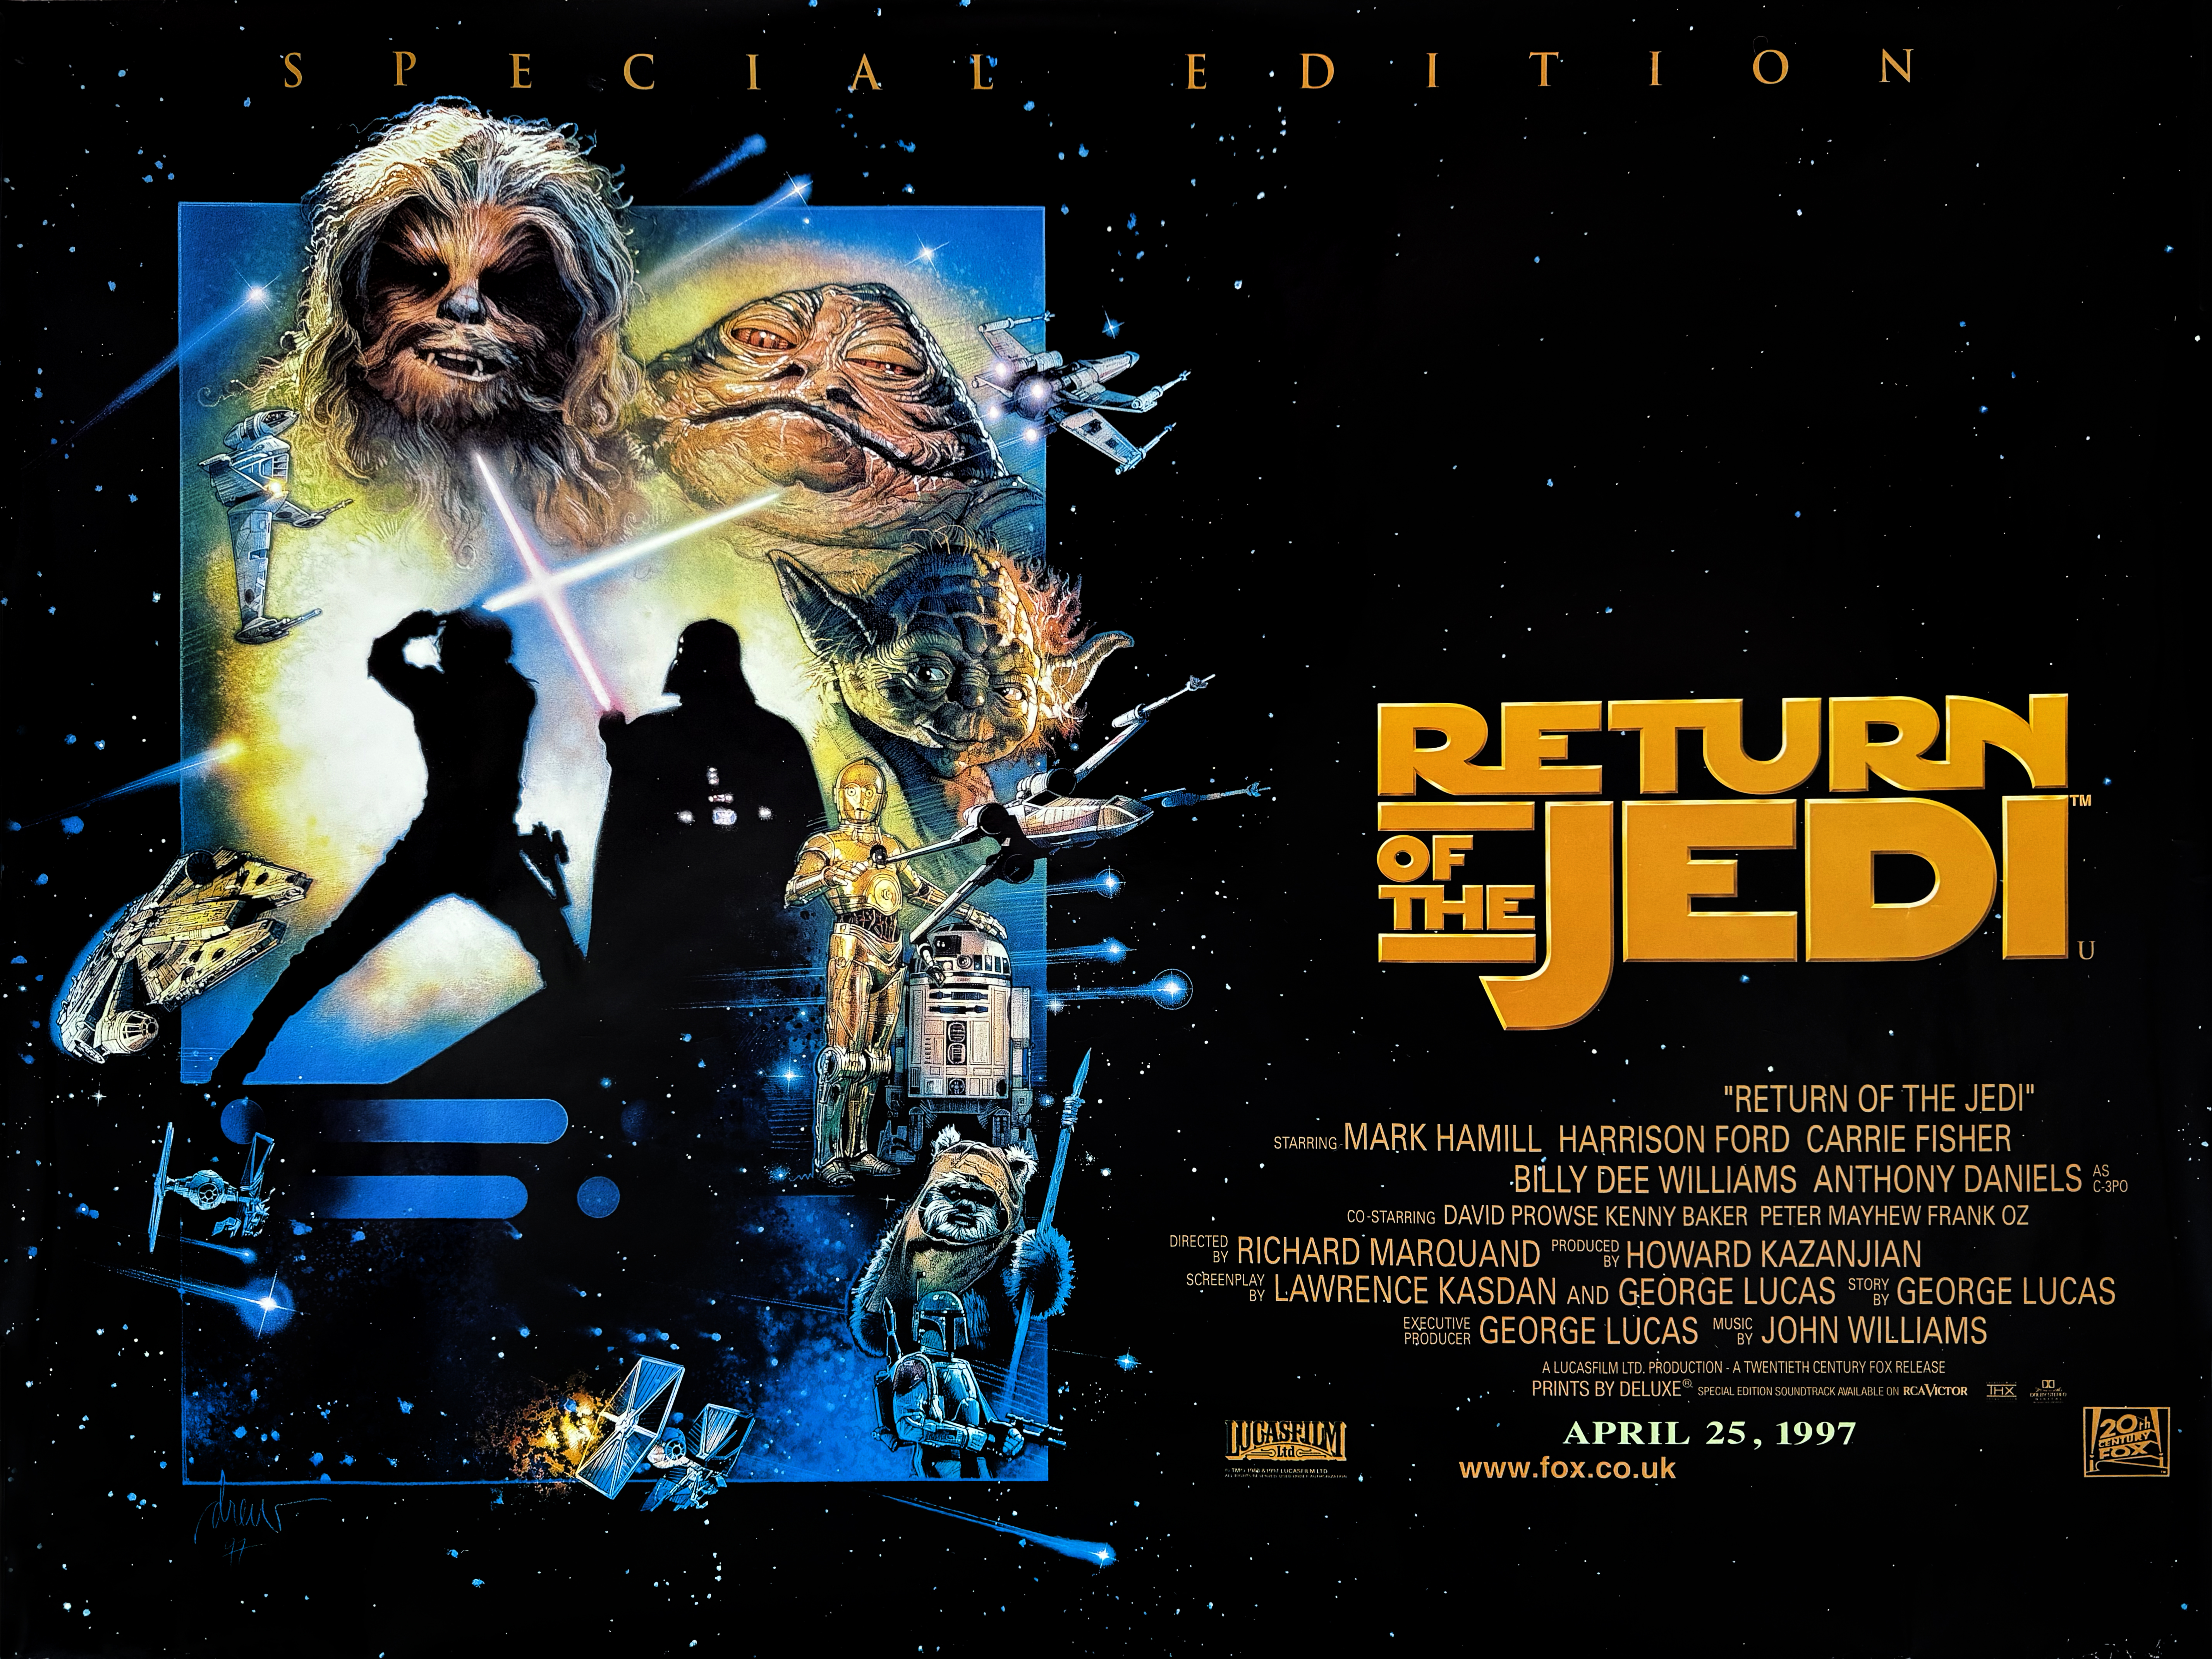 RETURN OF THE JEDI special edition movie quad poster